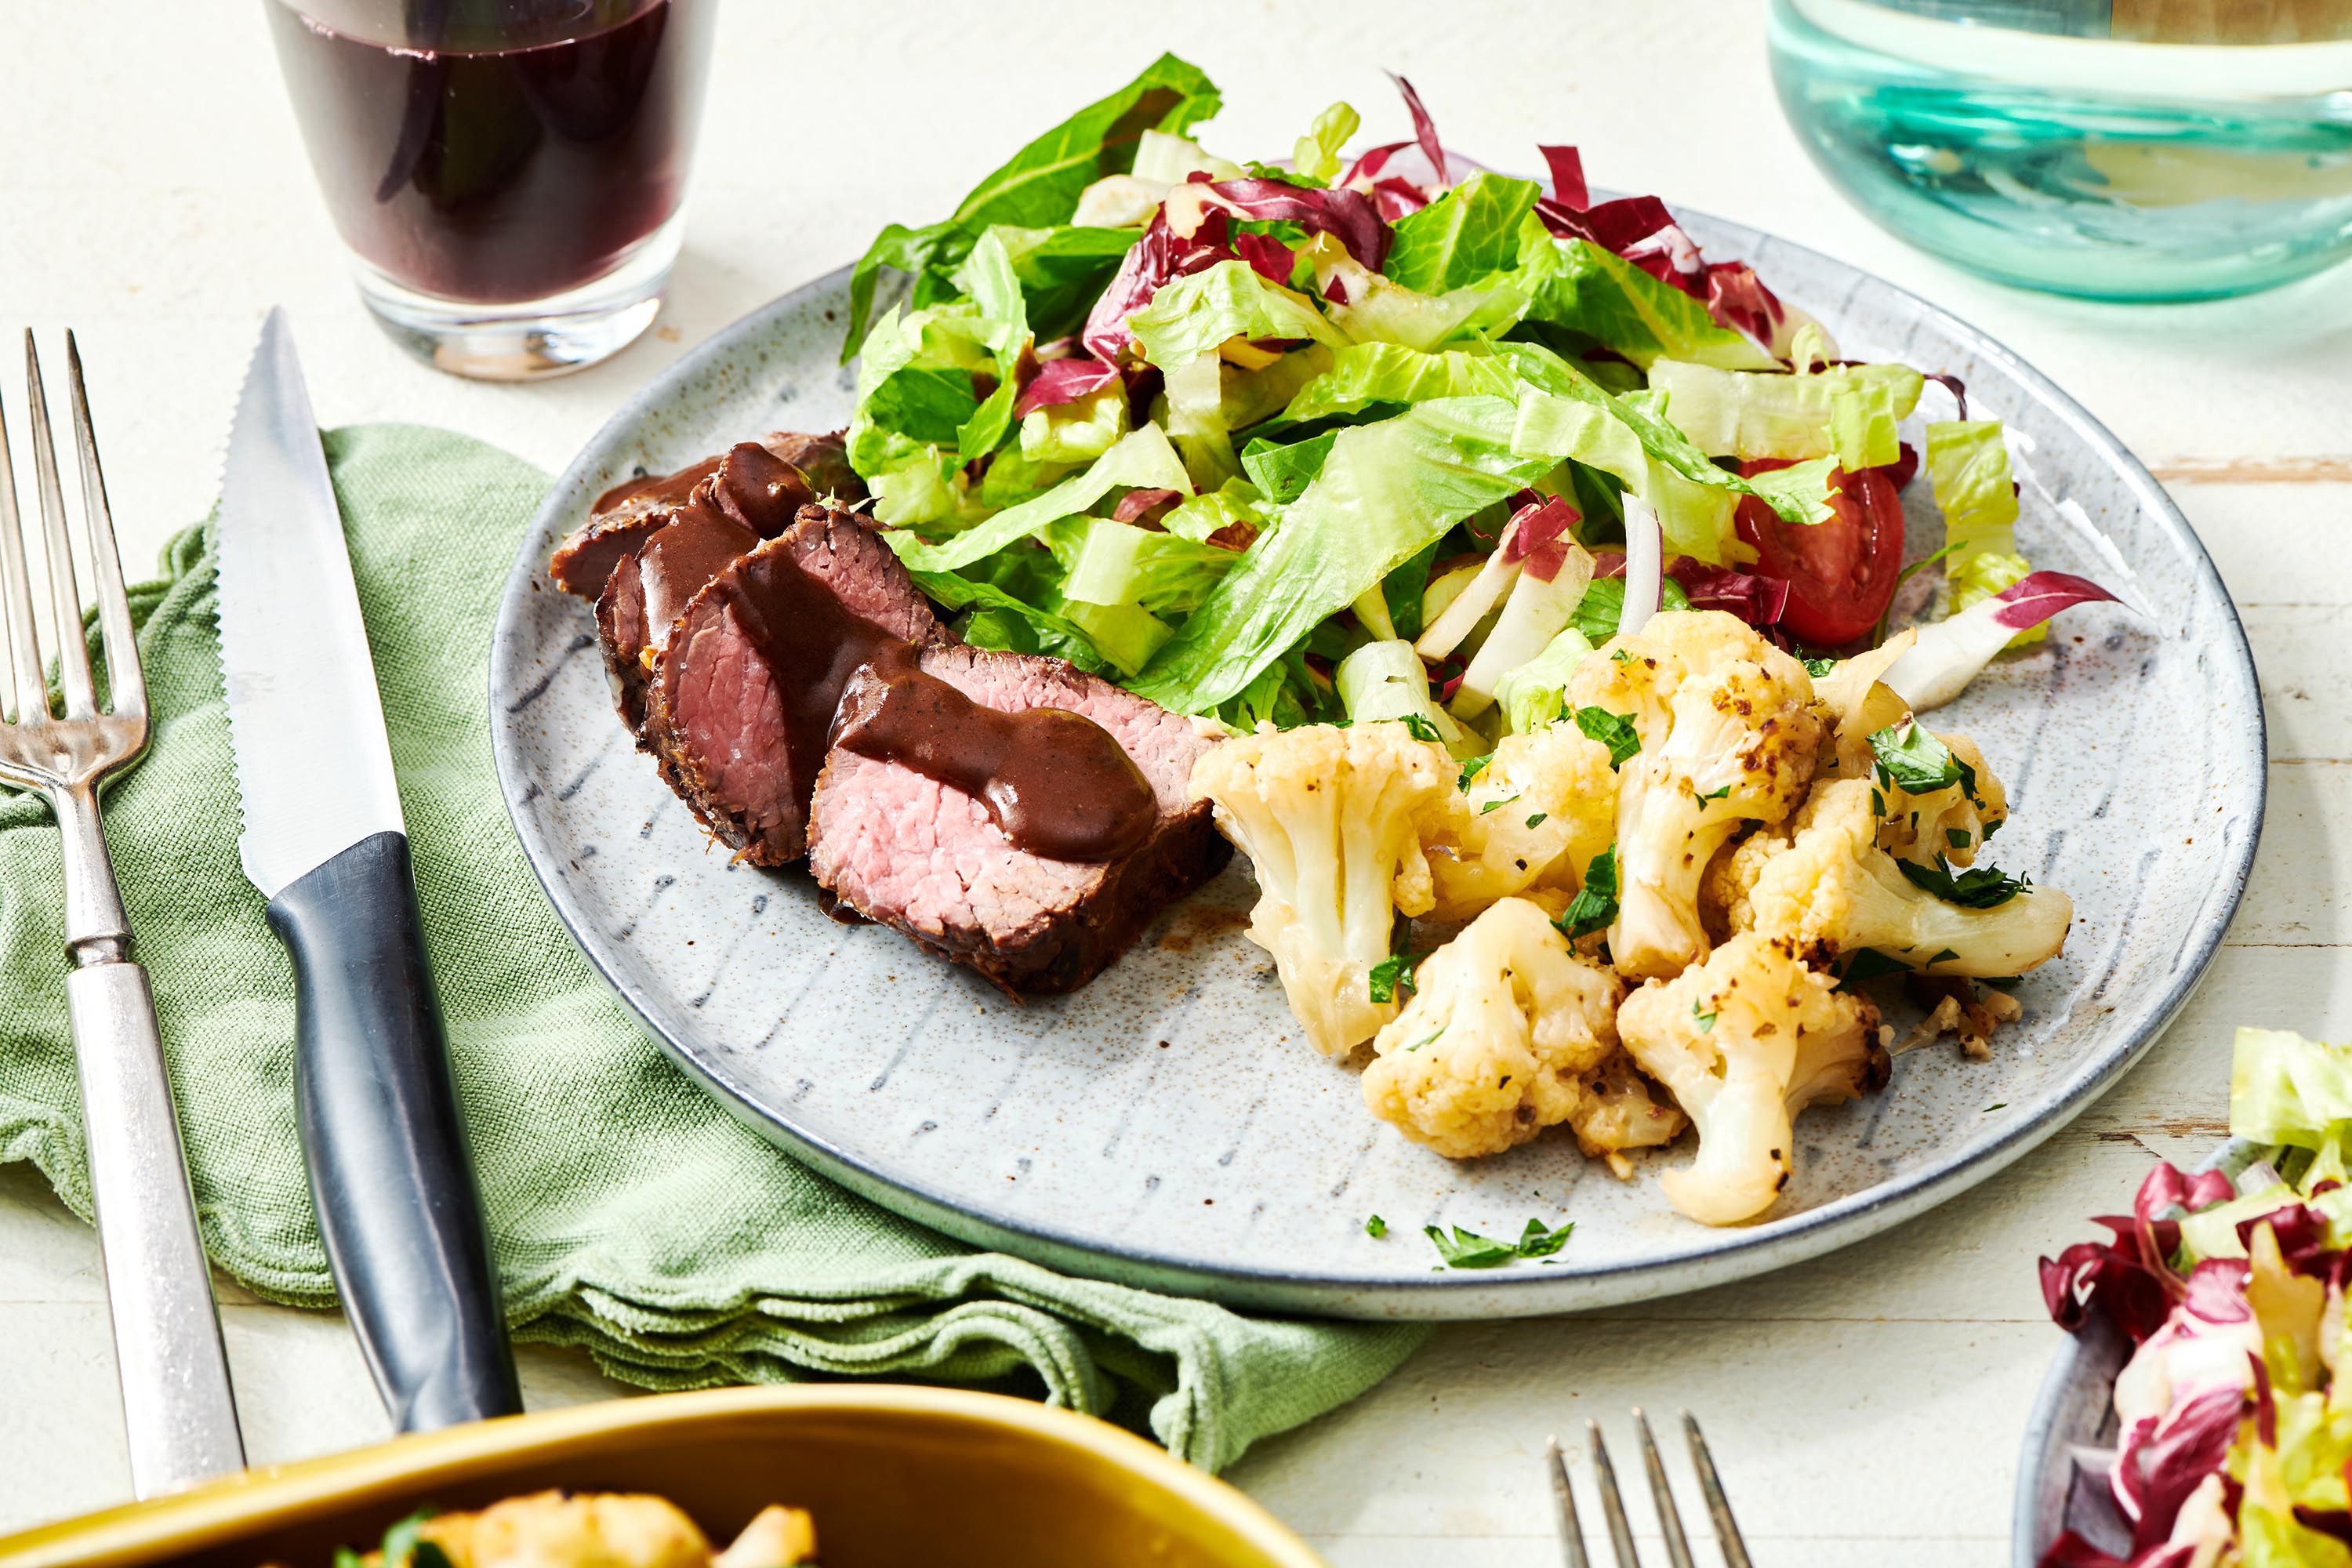 Plate of Braised Cauliflower, meat, and green salad.